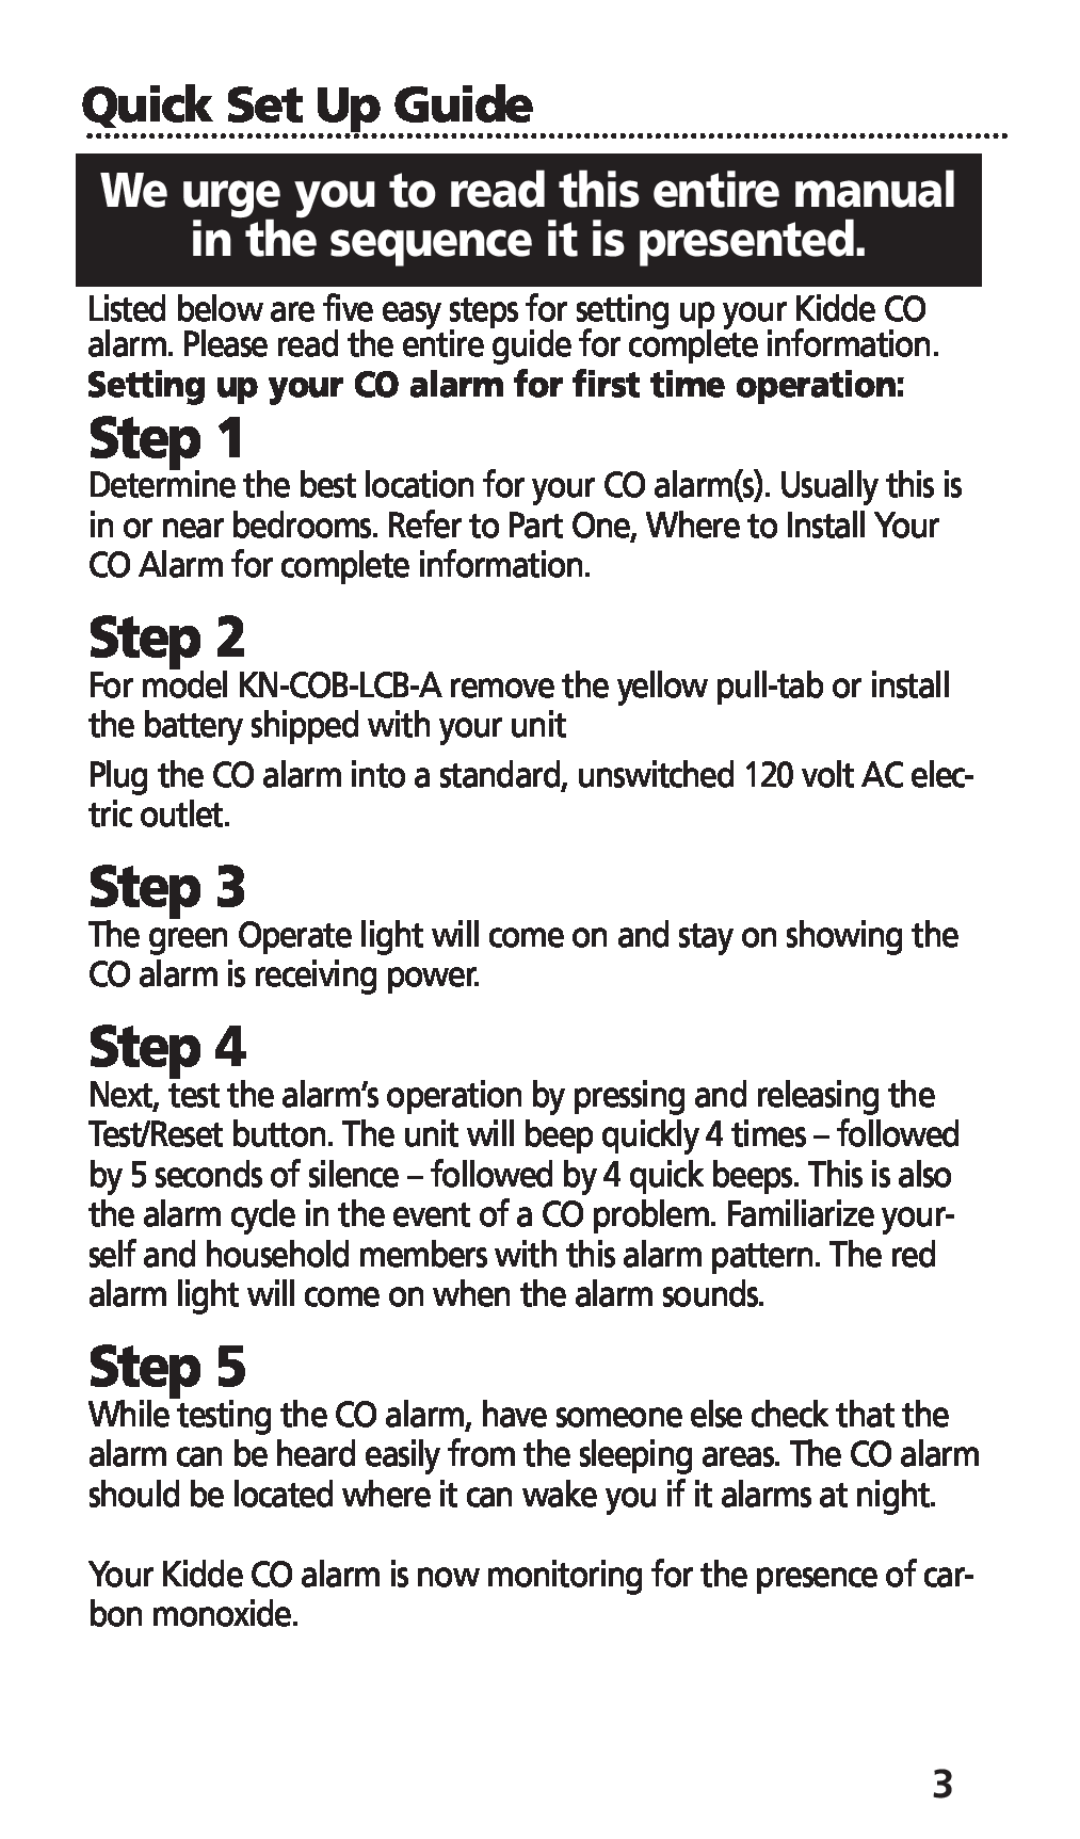 Kidde KN-COB-LCB-A, KN-COB-DP-H manual Quick Set Up Guide, Setting up your CO alarm for first time operation, Step 